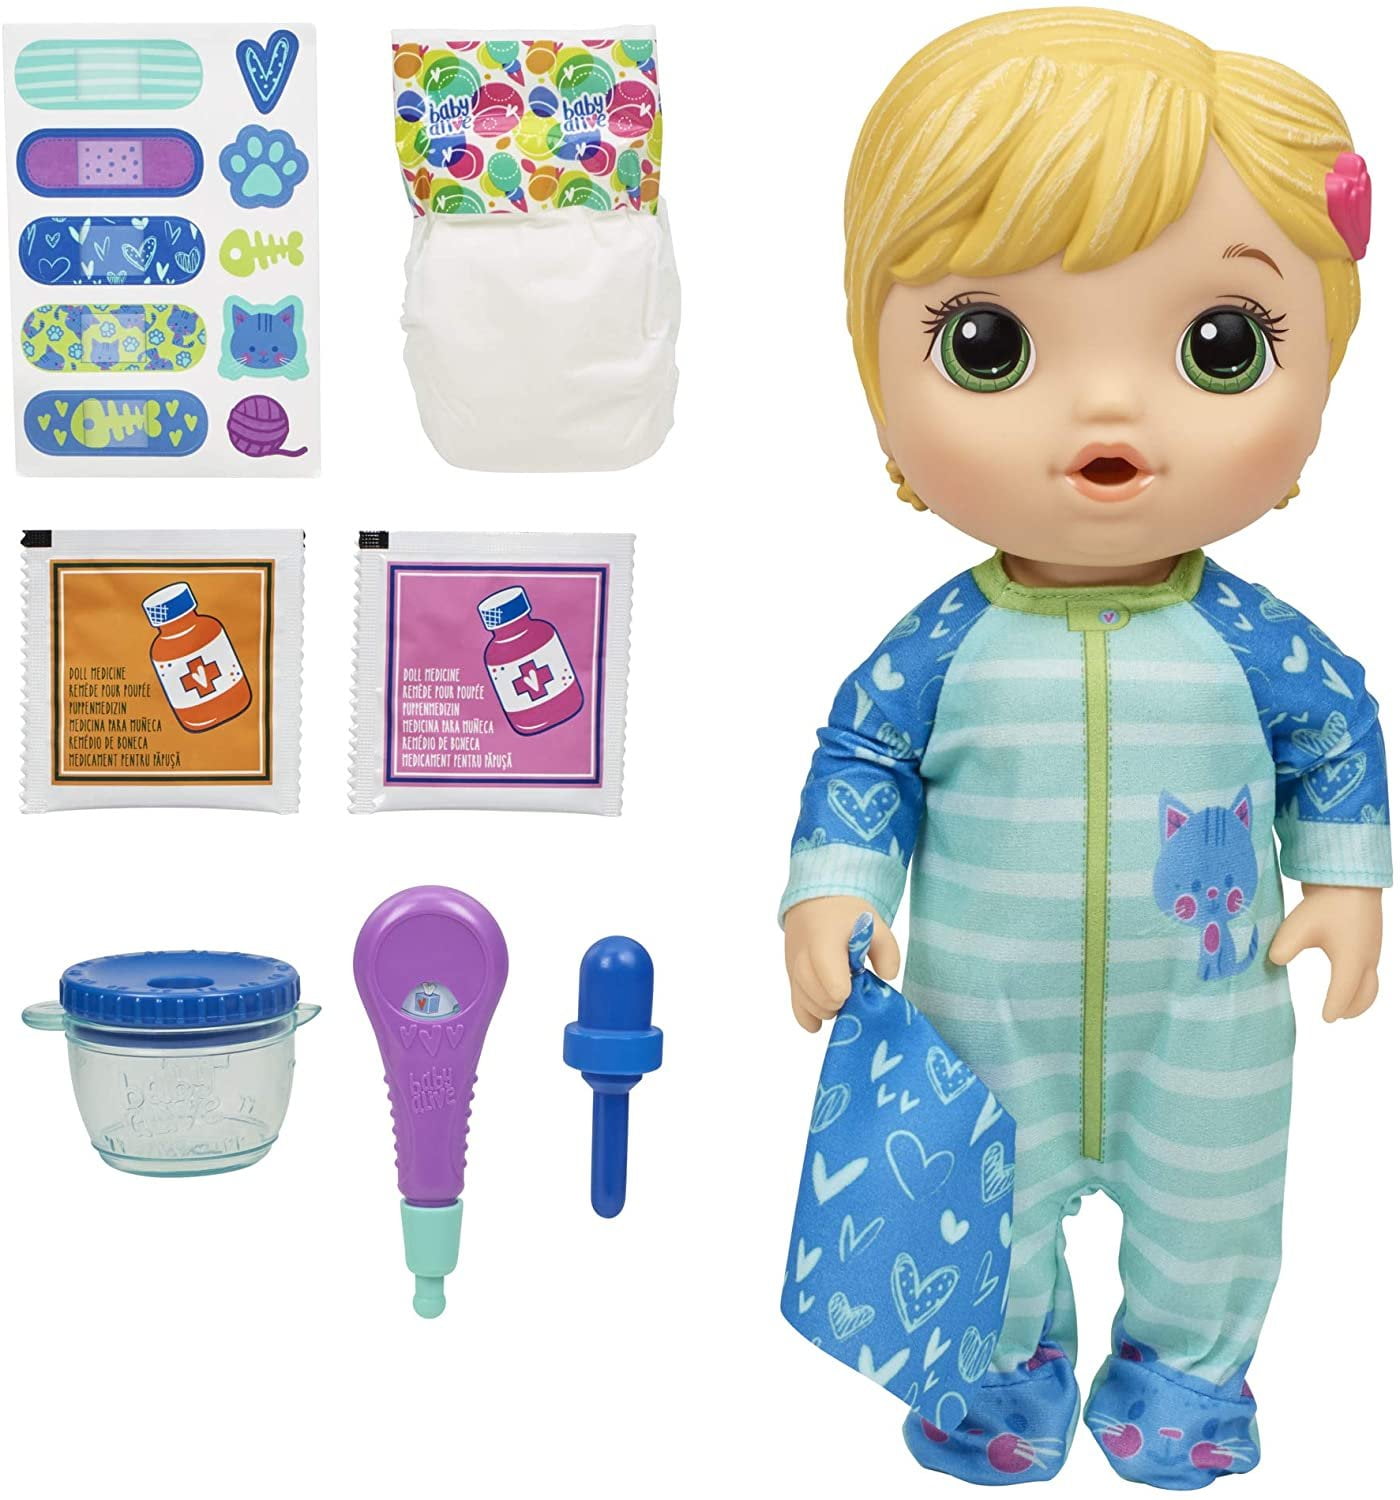 Baby Alive Sudsy Styling Doll, 12-Inch Toy for Kids 3 and Up, Salon Baby Doll  Accessories, Bubble Solution, Blonde Hair - Baby Alive